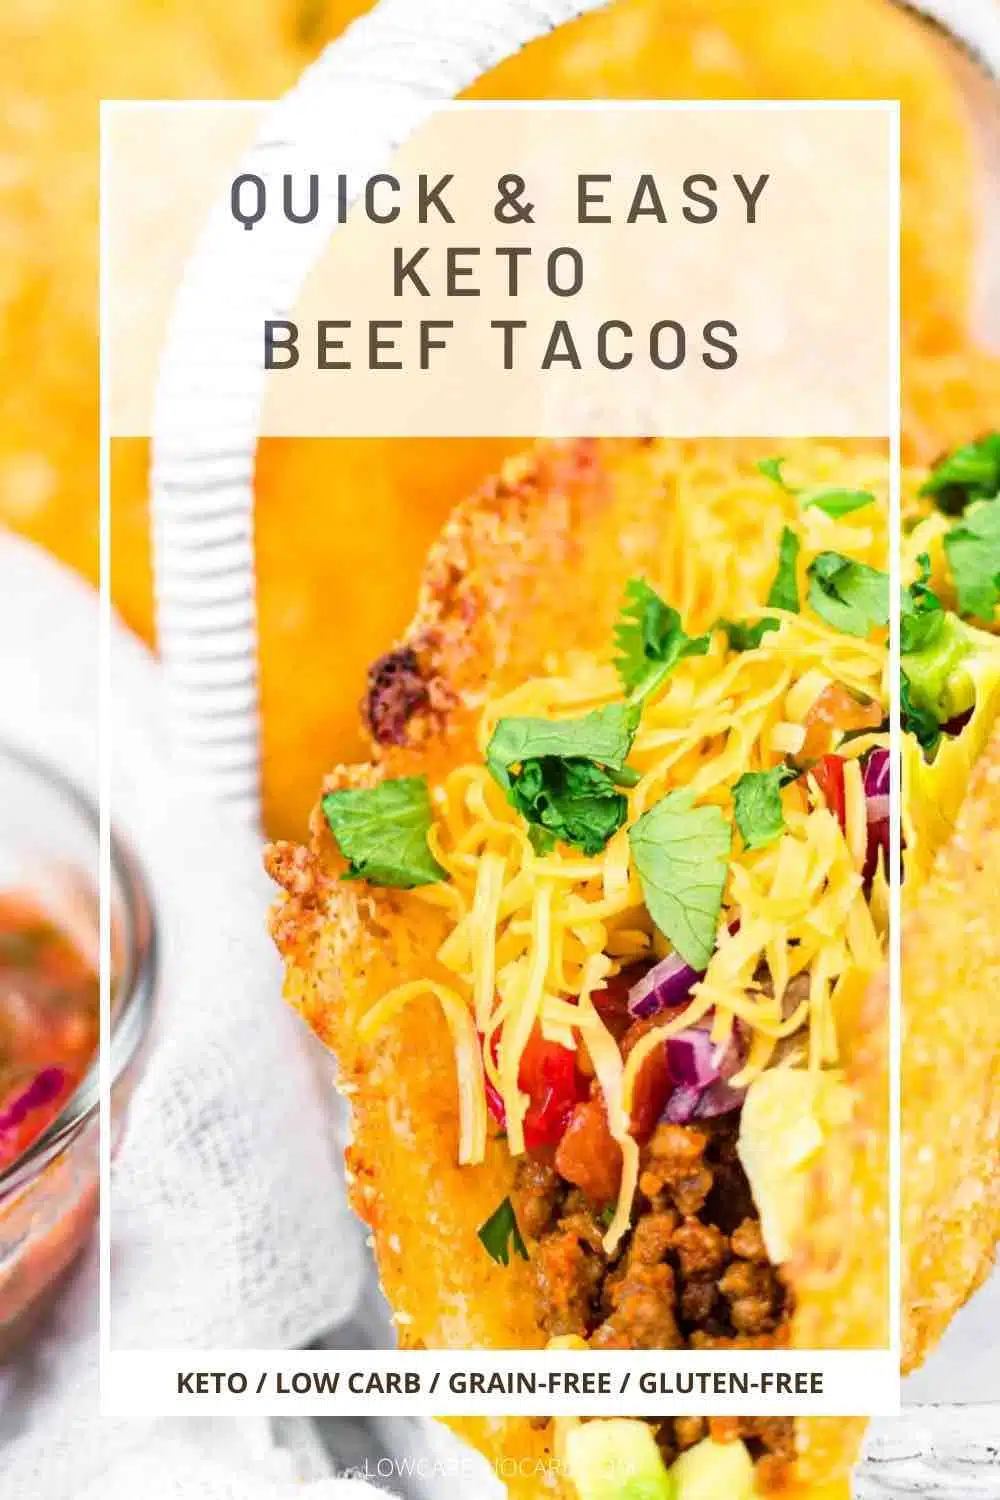 Keto Tacos with Ground Beef served in a white basket